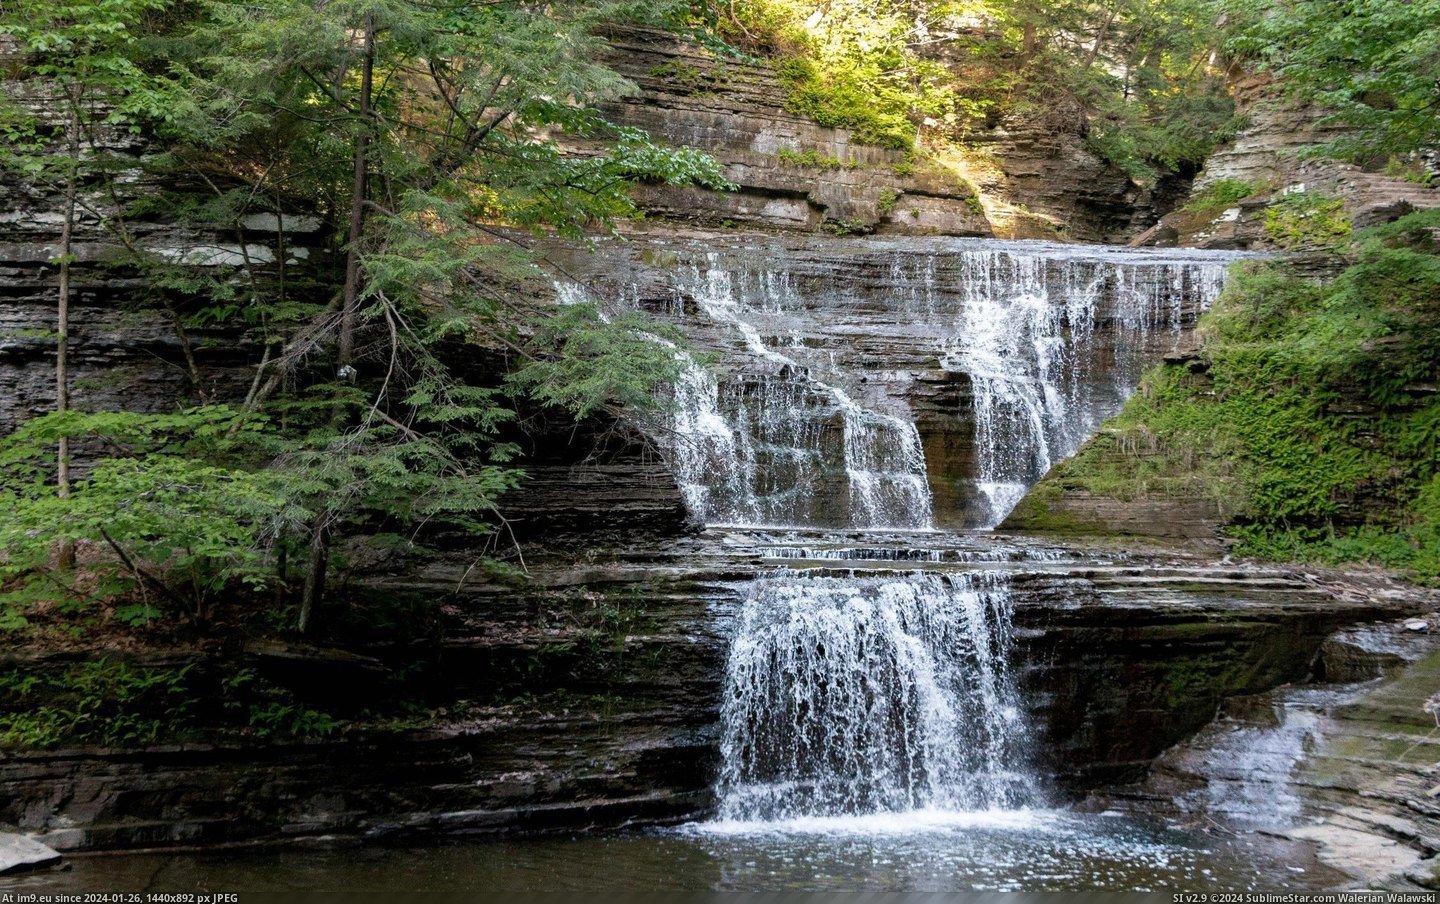 #Park #State #Summertime #Falls #York [Earthporn] Summertime at Buttermilk Falls State Park in New York [2250x1406] Pic. (Bild von album My r/EARTHPORN favs))